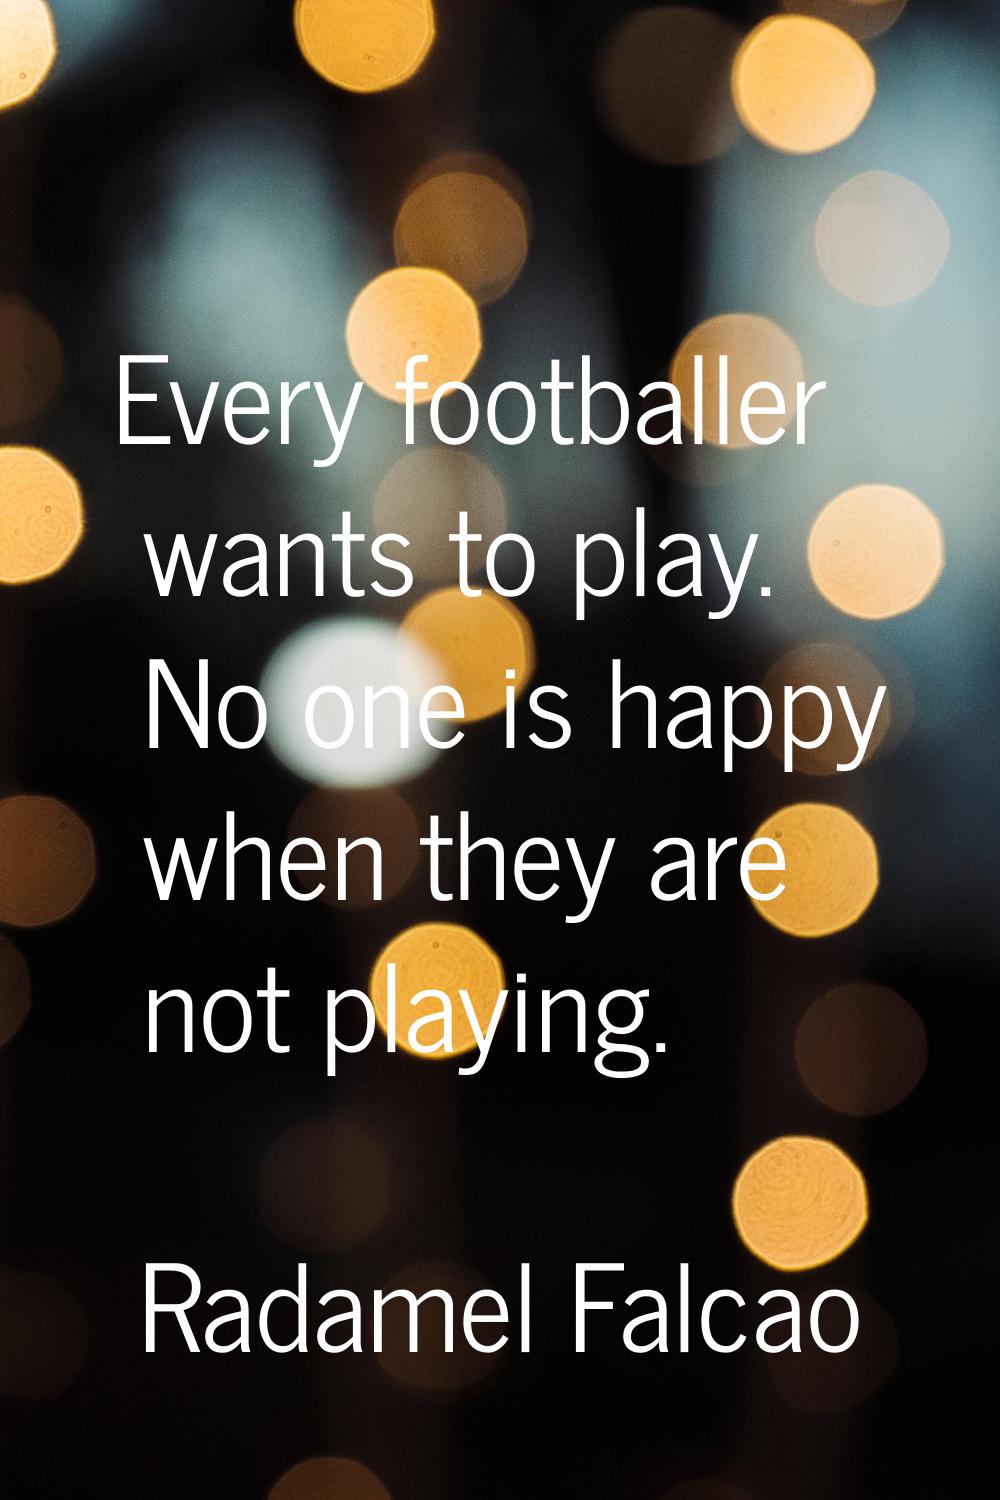 Every footballer wants to play. No one is happy when they are not playing.